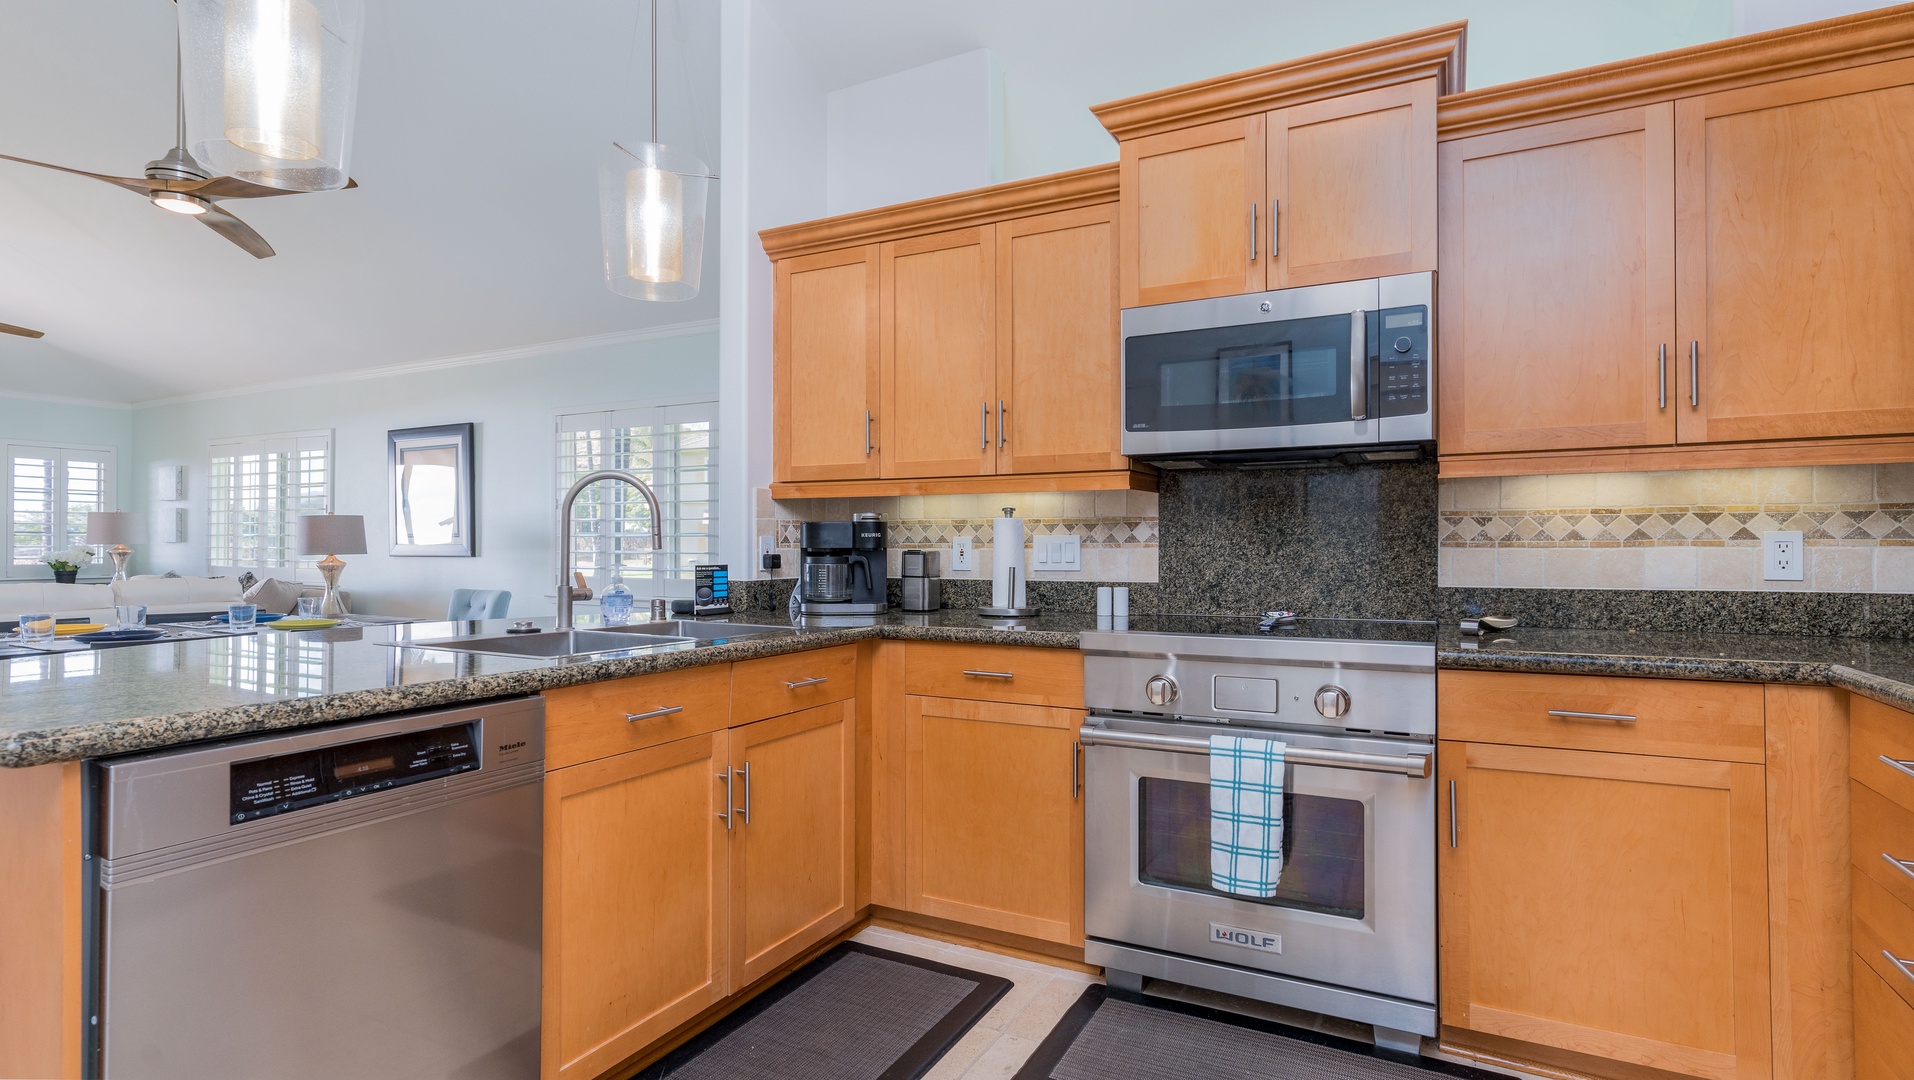 Kapolei Vacation Rentals, Kai Lani 21C - Gracious amenities for your culinary adventures in the kitchen.